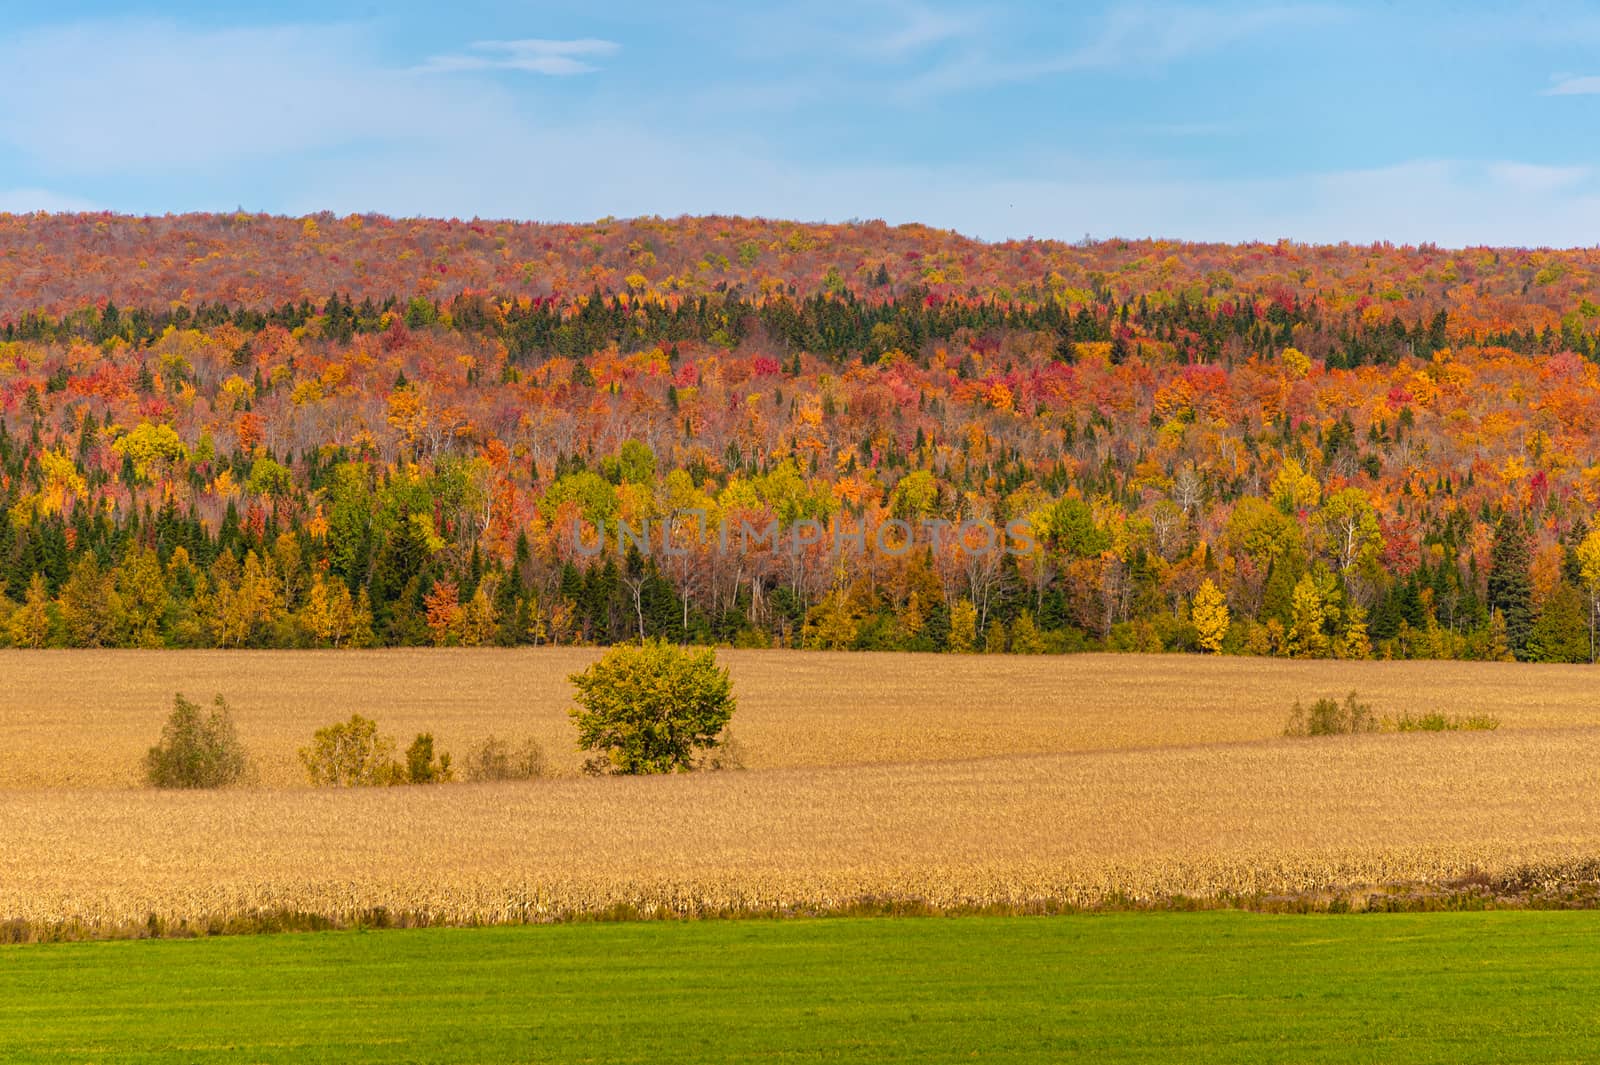 Trees with autumn foliage in Canada by mbruxelle